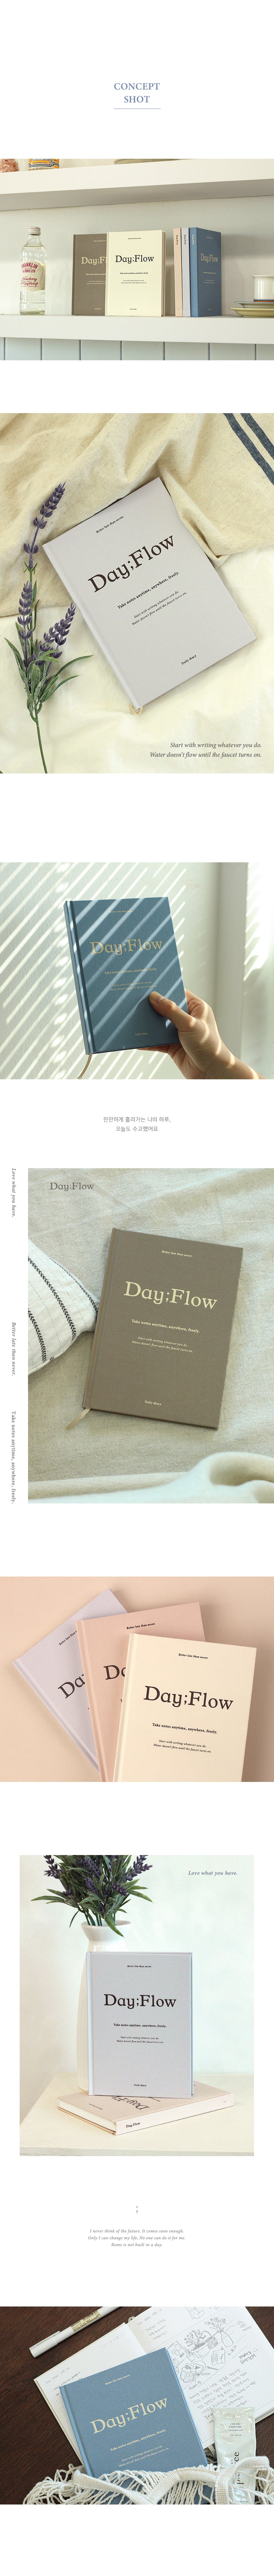 Day;Flow Daily Diary Dash and Dot 21 Planner, Journal, Diary Hunter & The Scholar